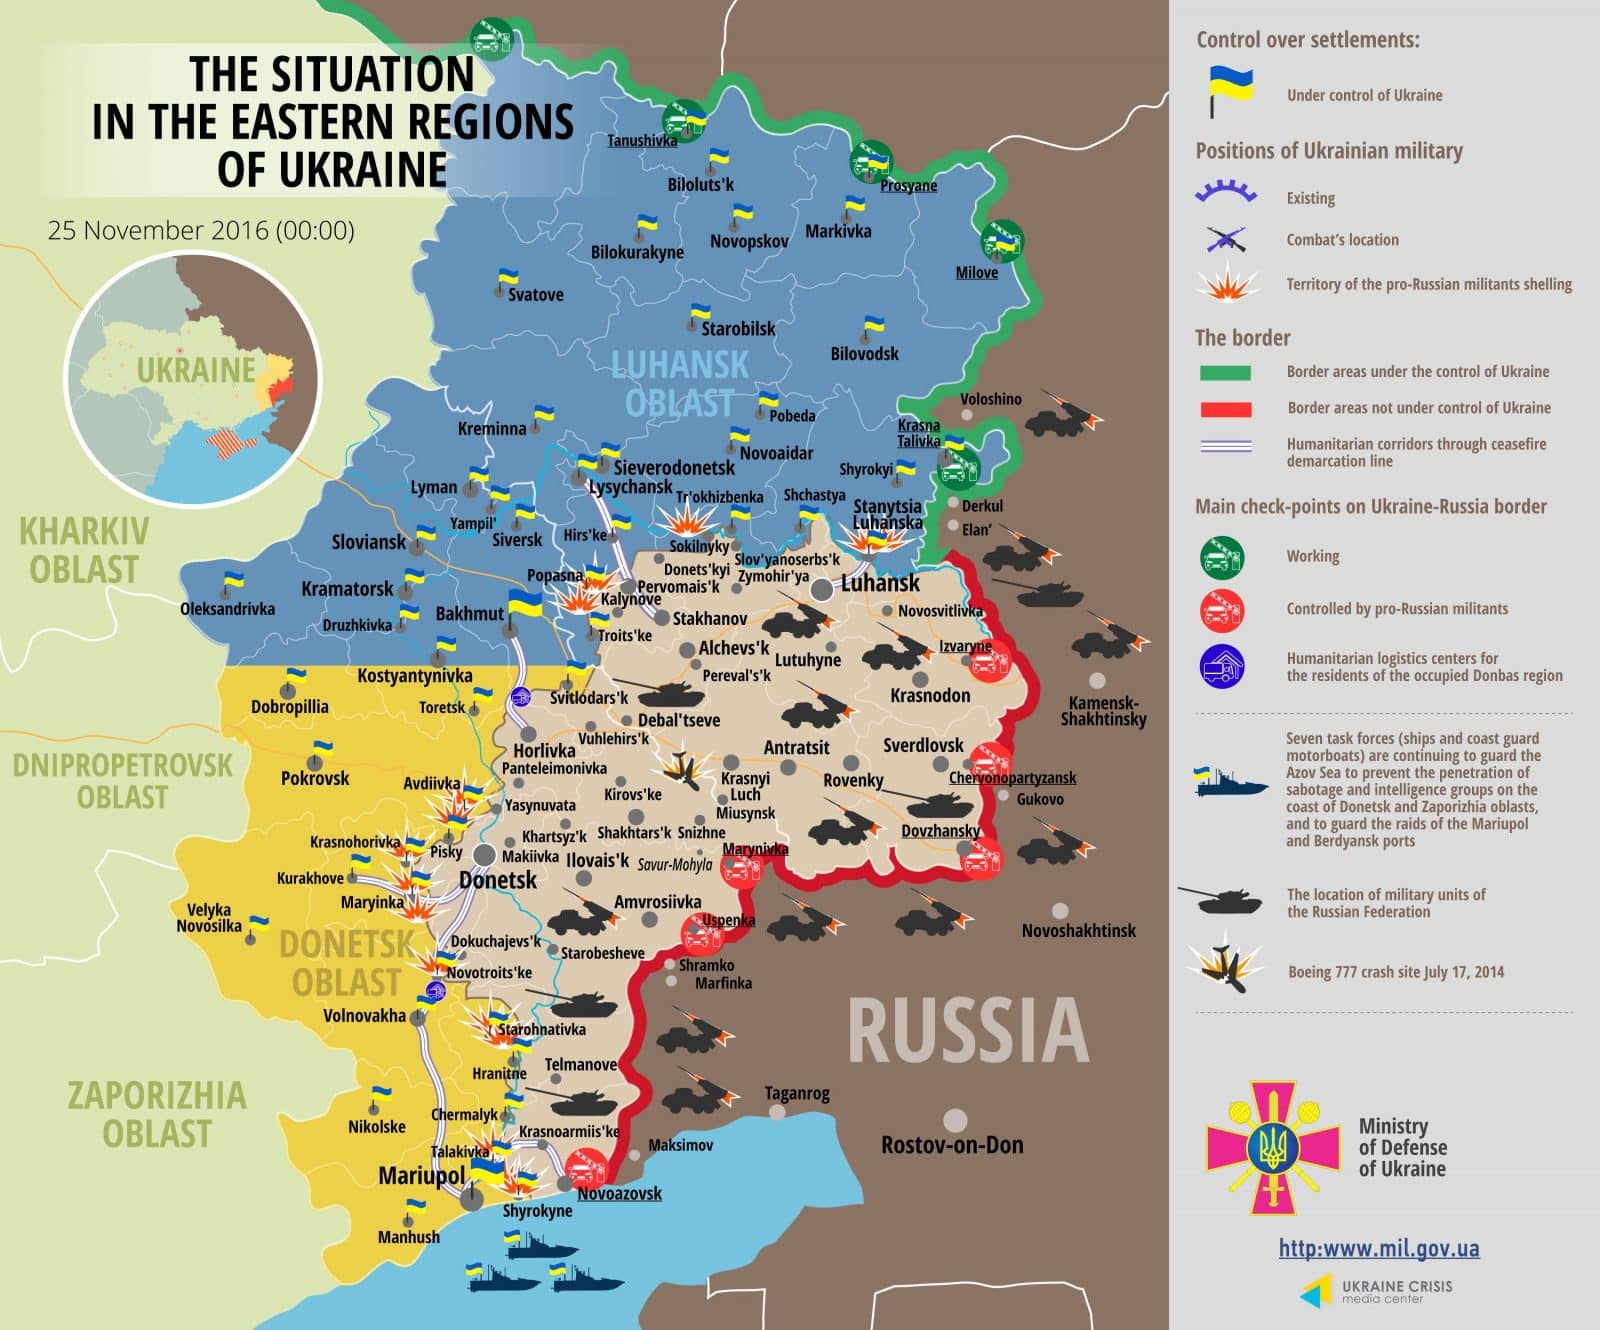 Russian troops attack Ukraine 28 times in last day, use artillery and mortars. One Ukrainian serviceman killed, several wounded